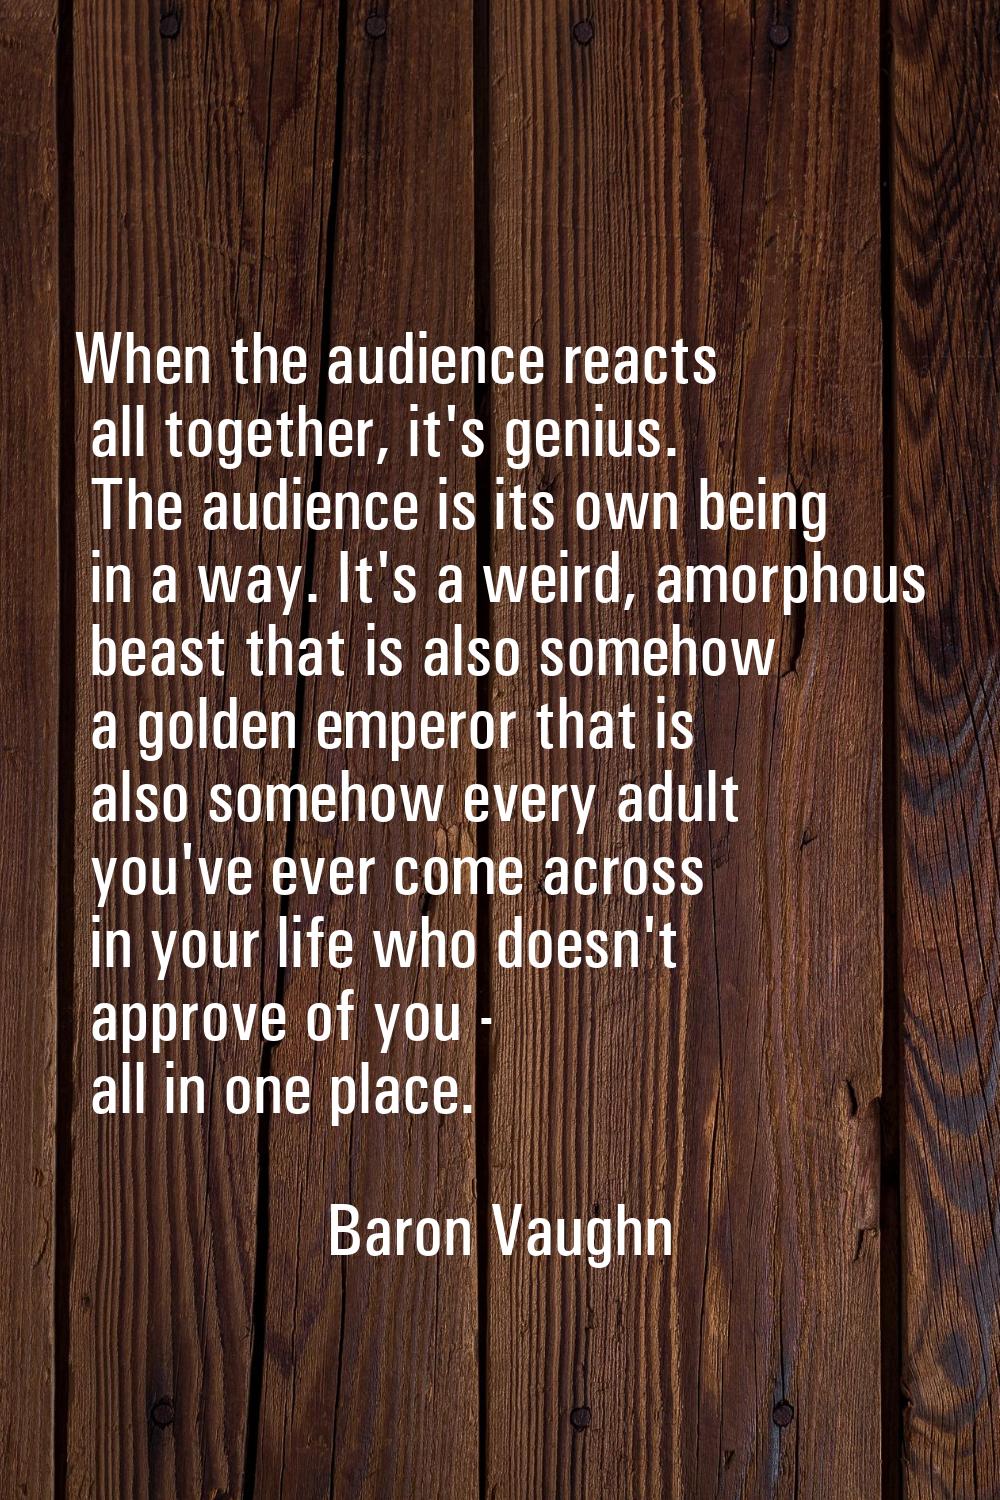 When the audience reacts all together, it's genius. The audience is its own being in a way. It's a 